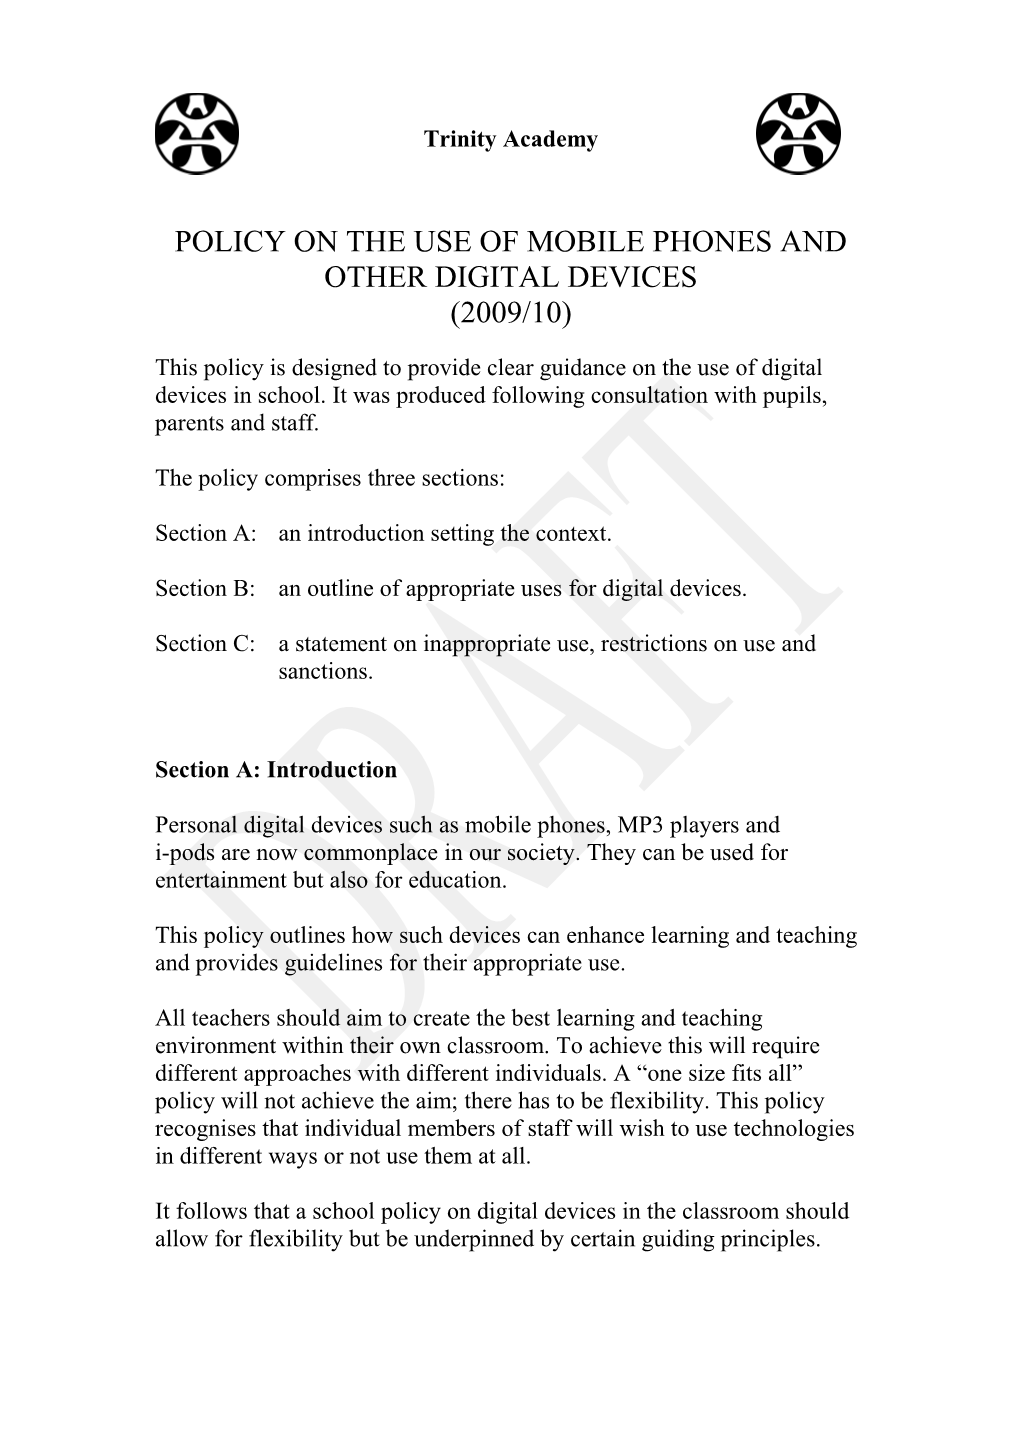 Policy on the Use of Mobile Phones and Other Digital Devices